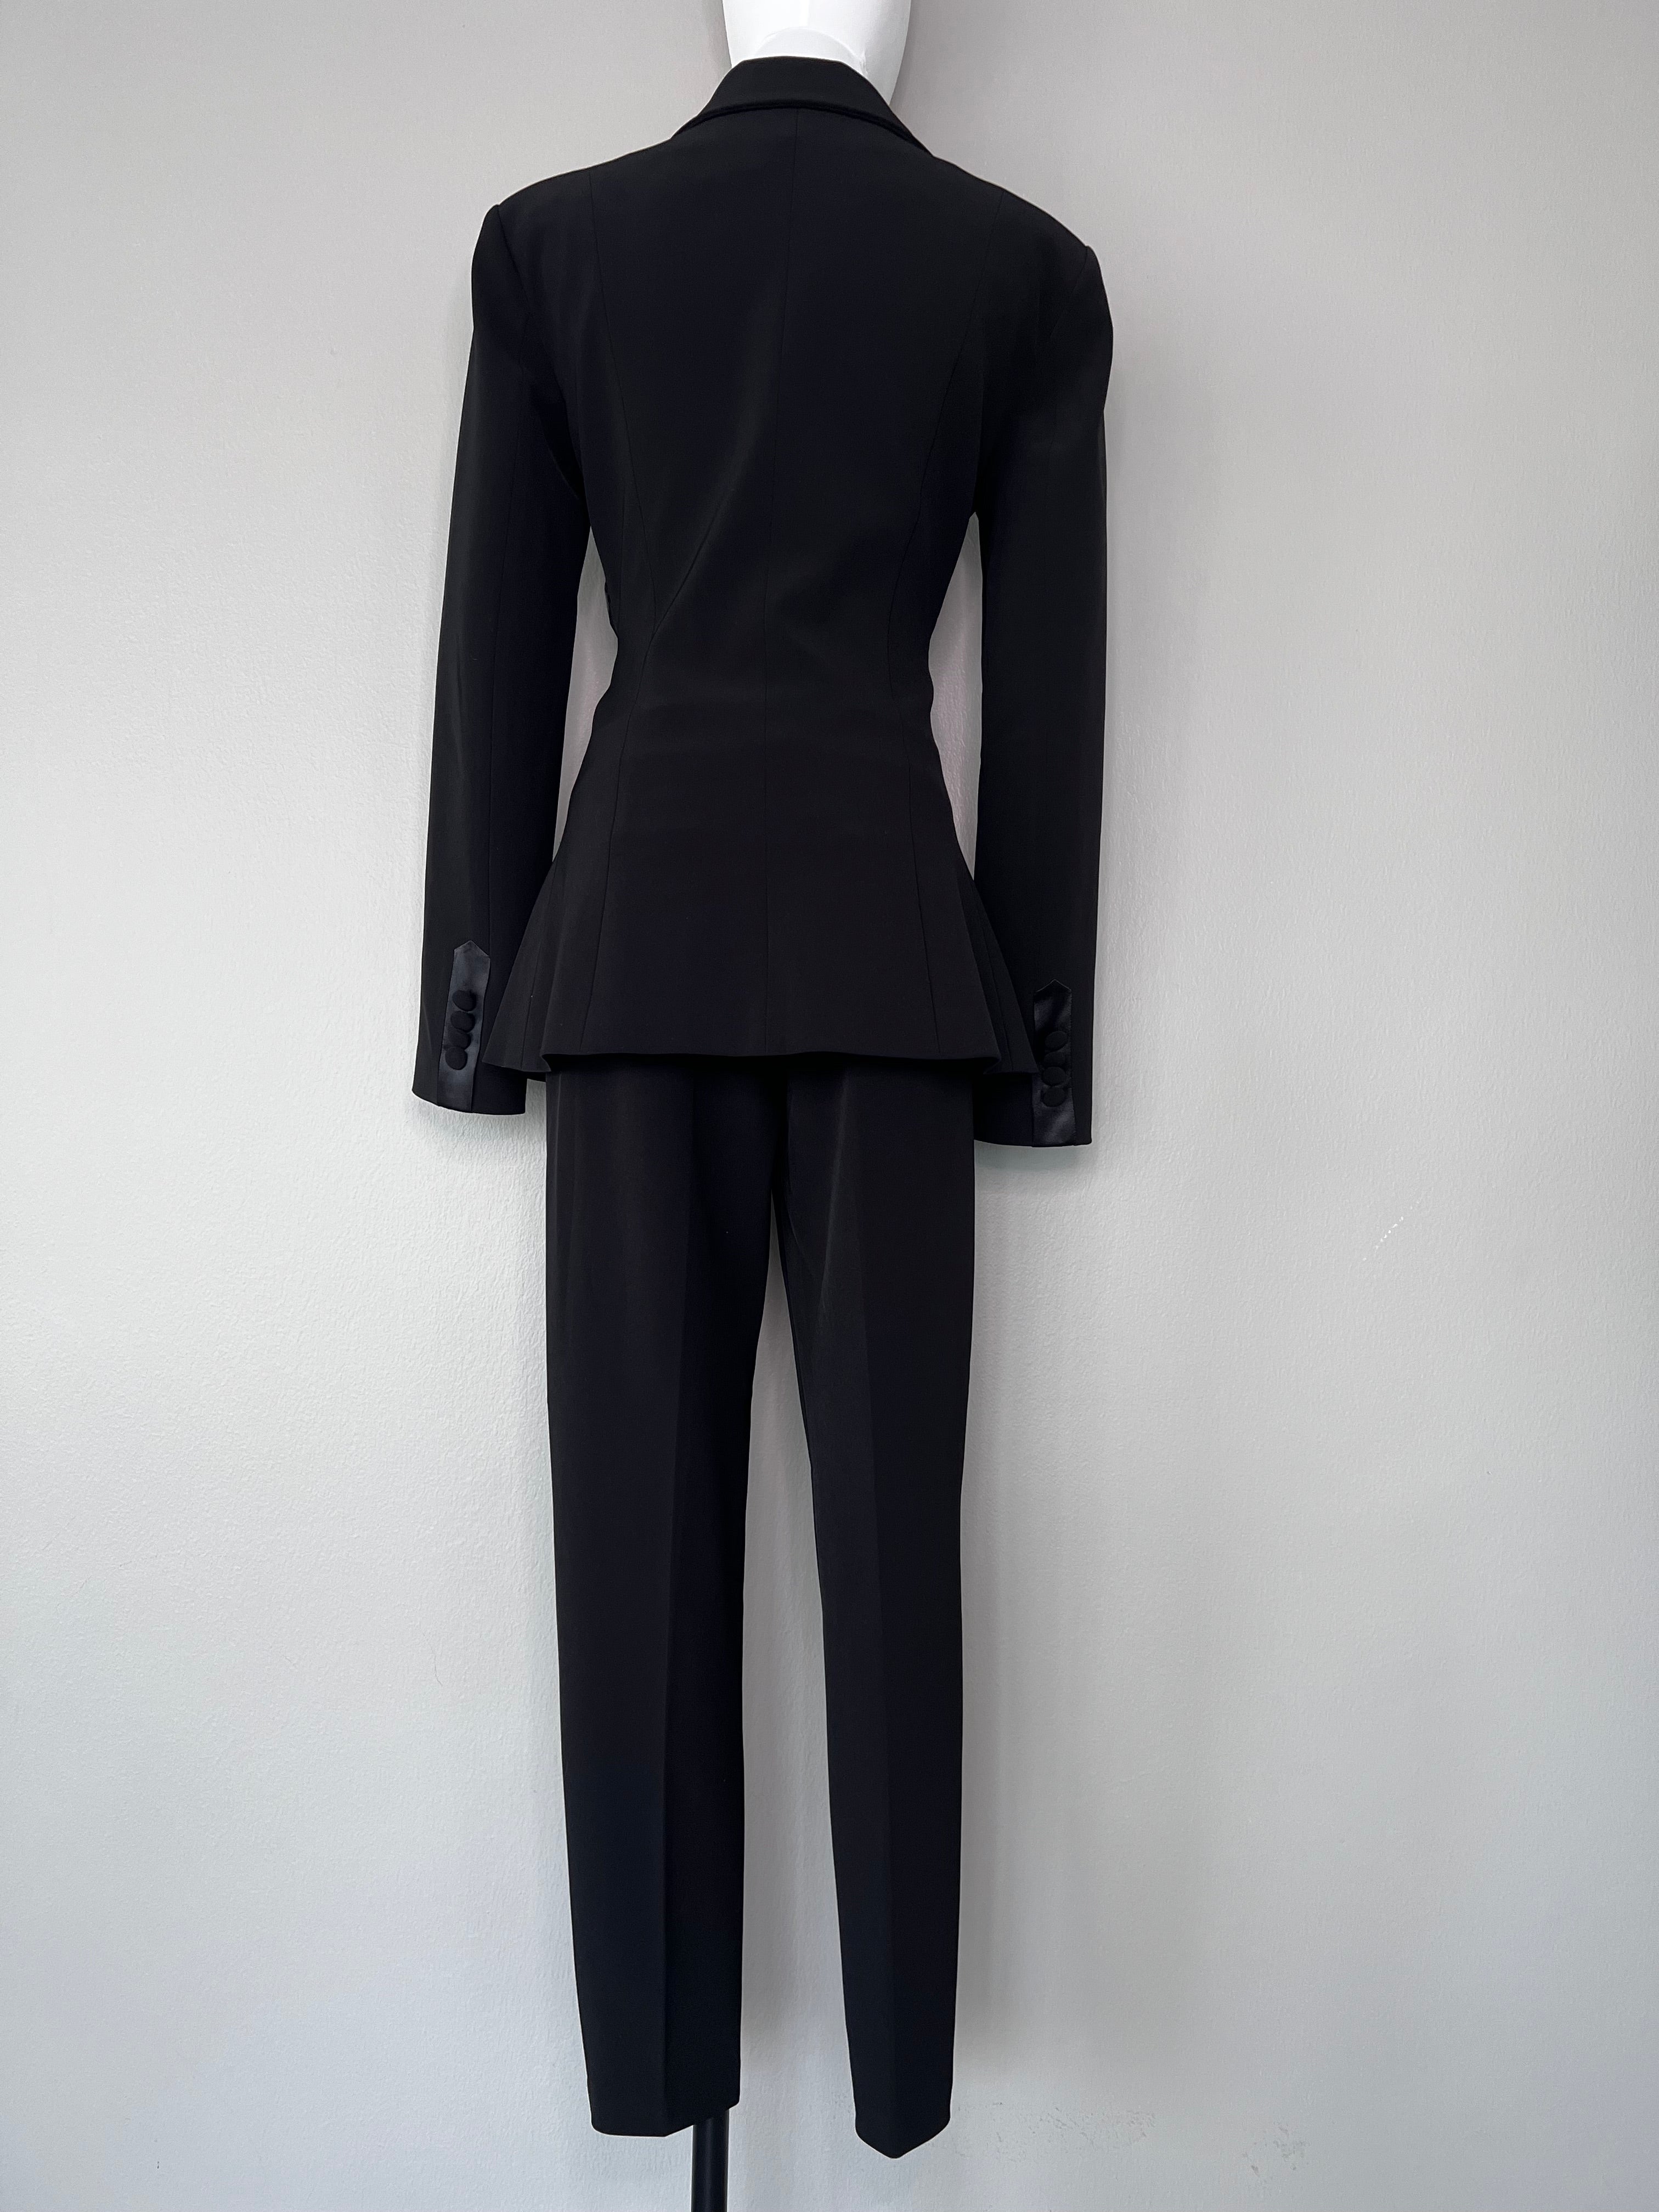 Black suit set with satin bow detail in the middle - GLAMODA